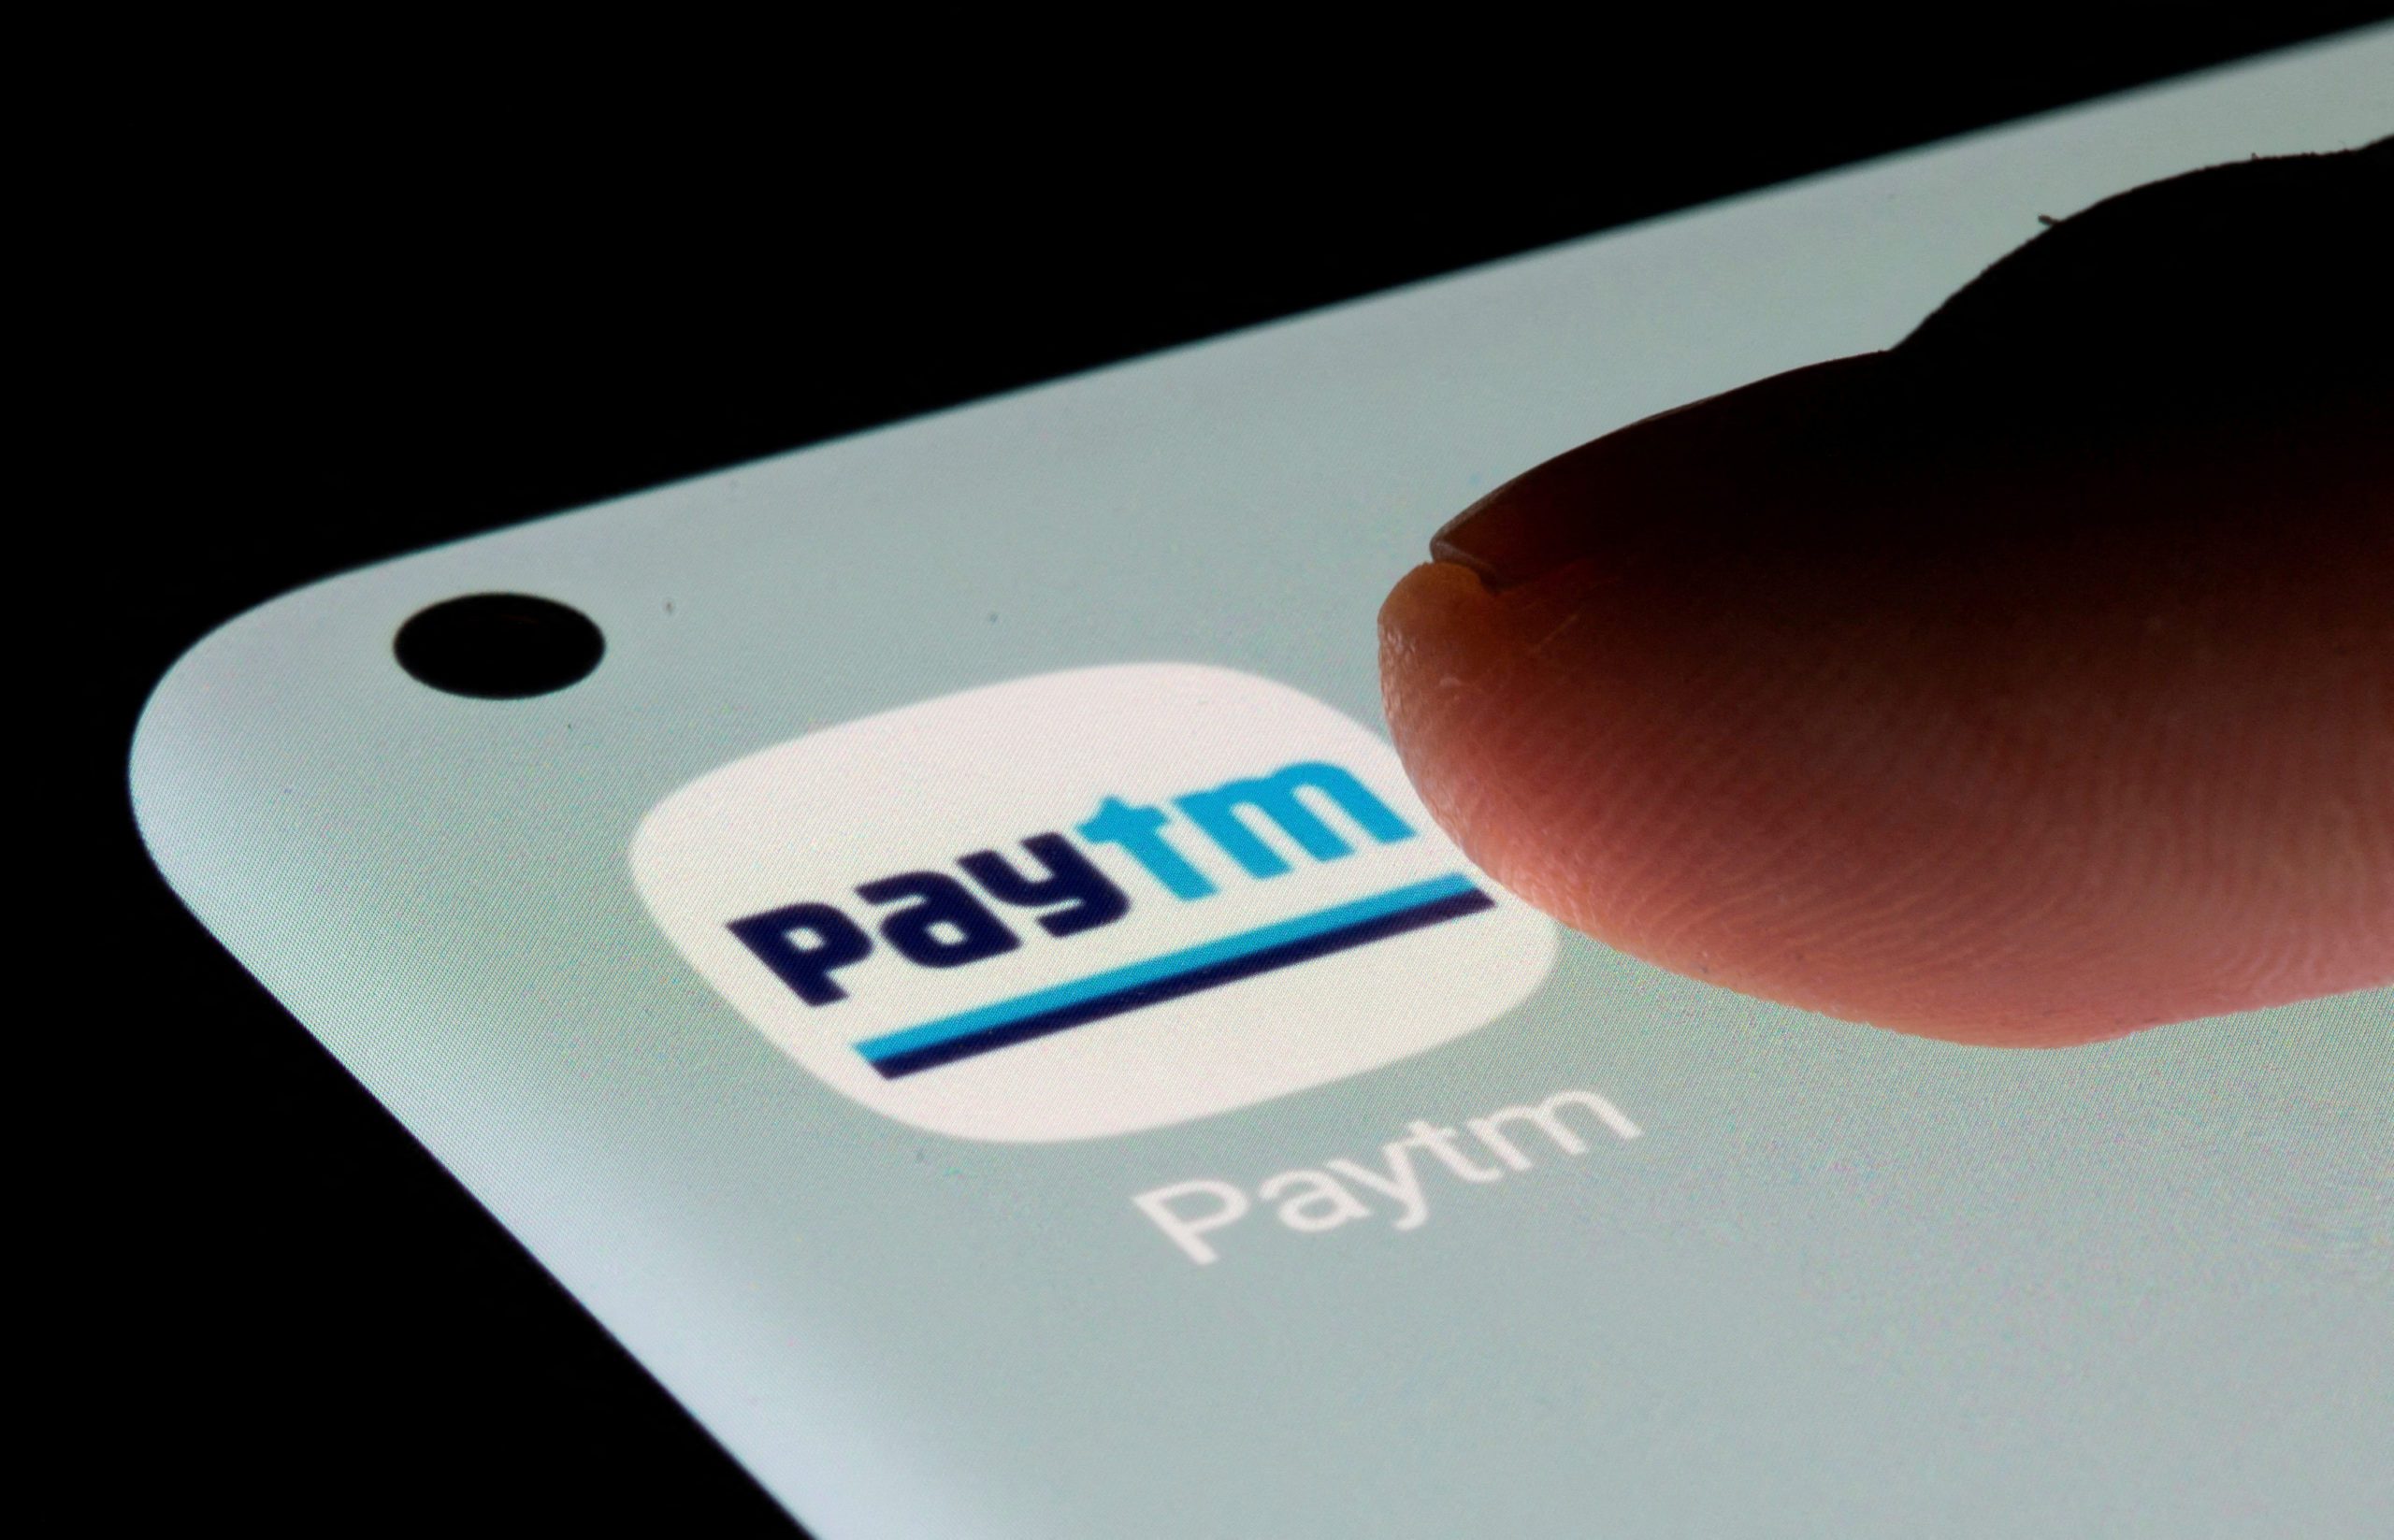 Indian regulator finds thousands of "improper" accounts at Paytm Payments Bank